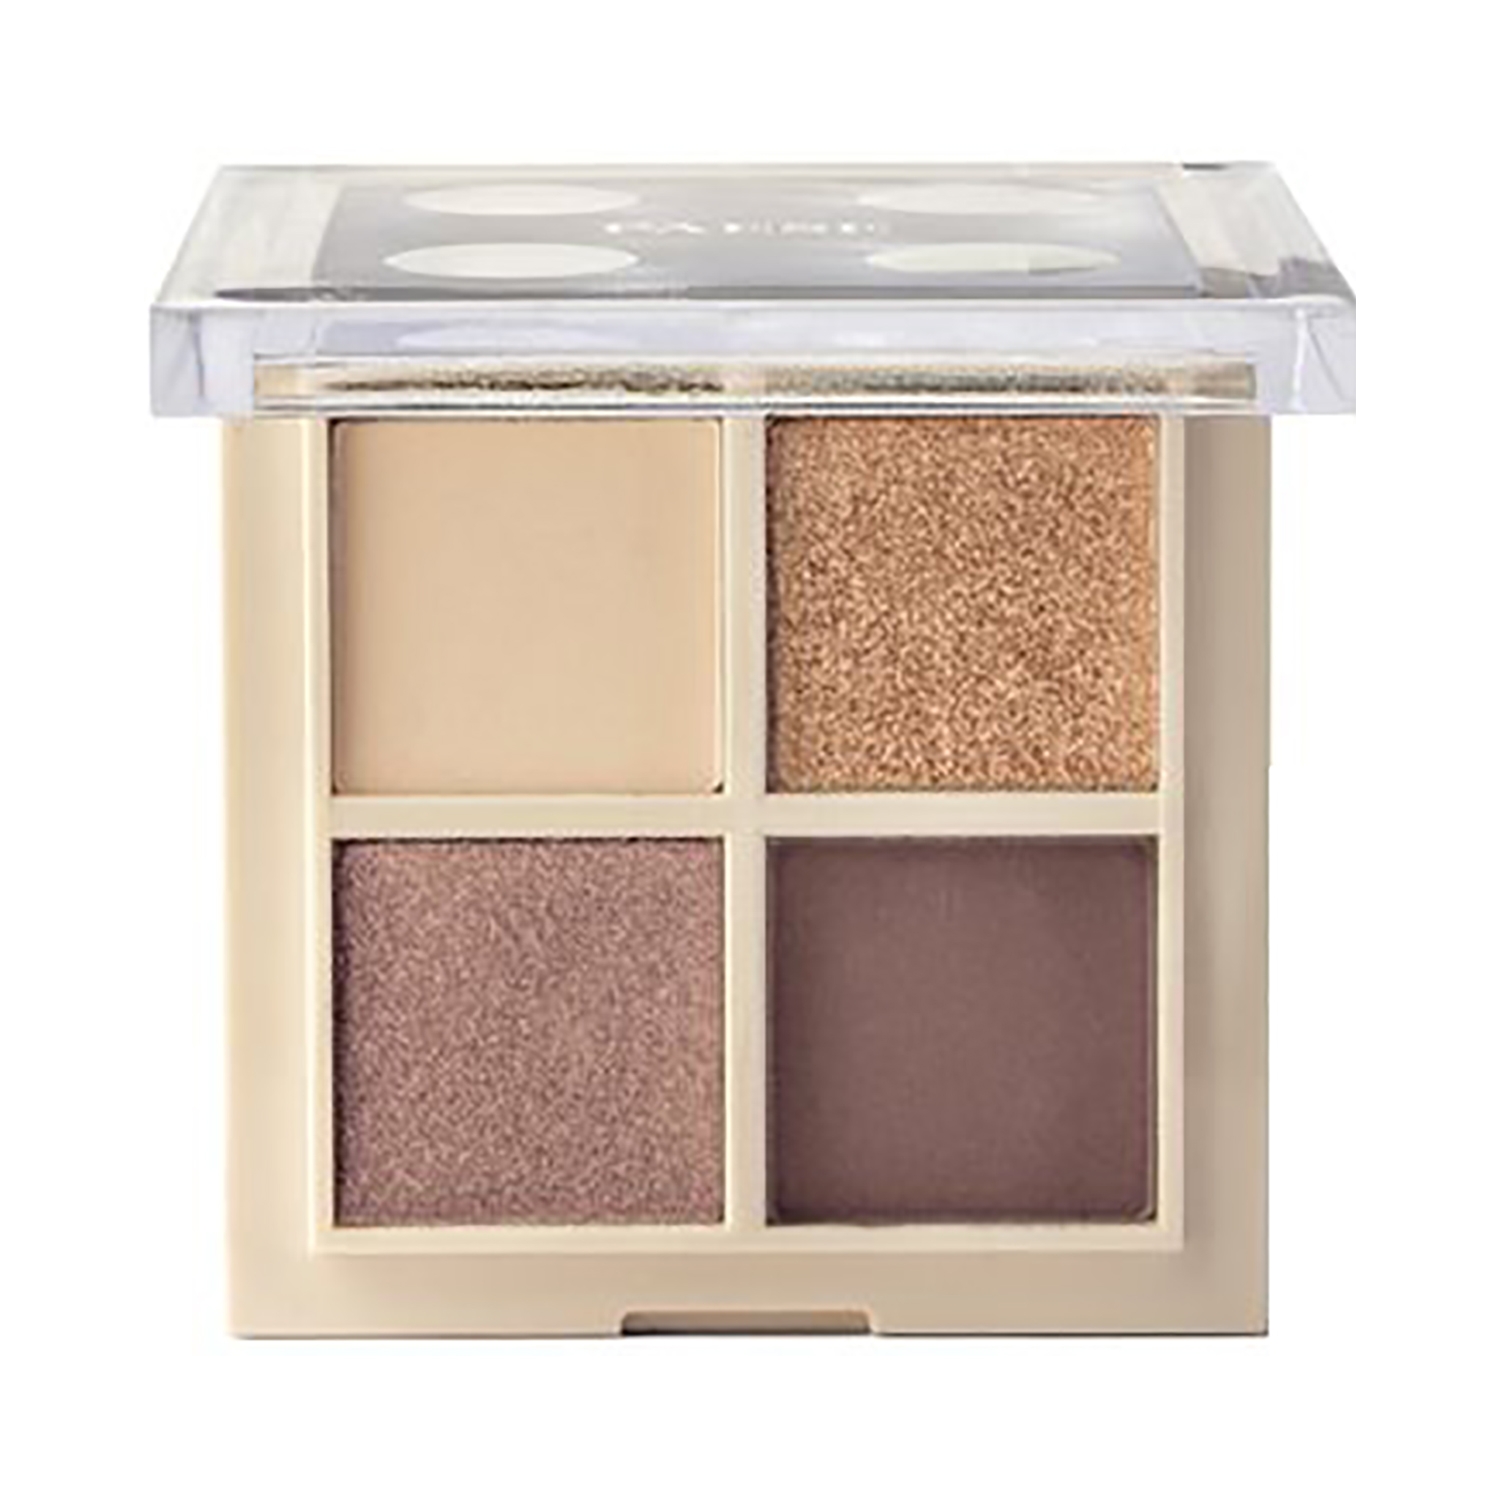 Paese Cosmetics | Paese Cosmetics Daily Vibe Eye Palette - 01 Golden Hour (5.5g)